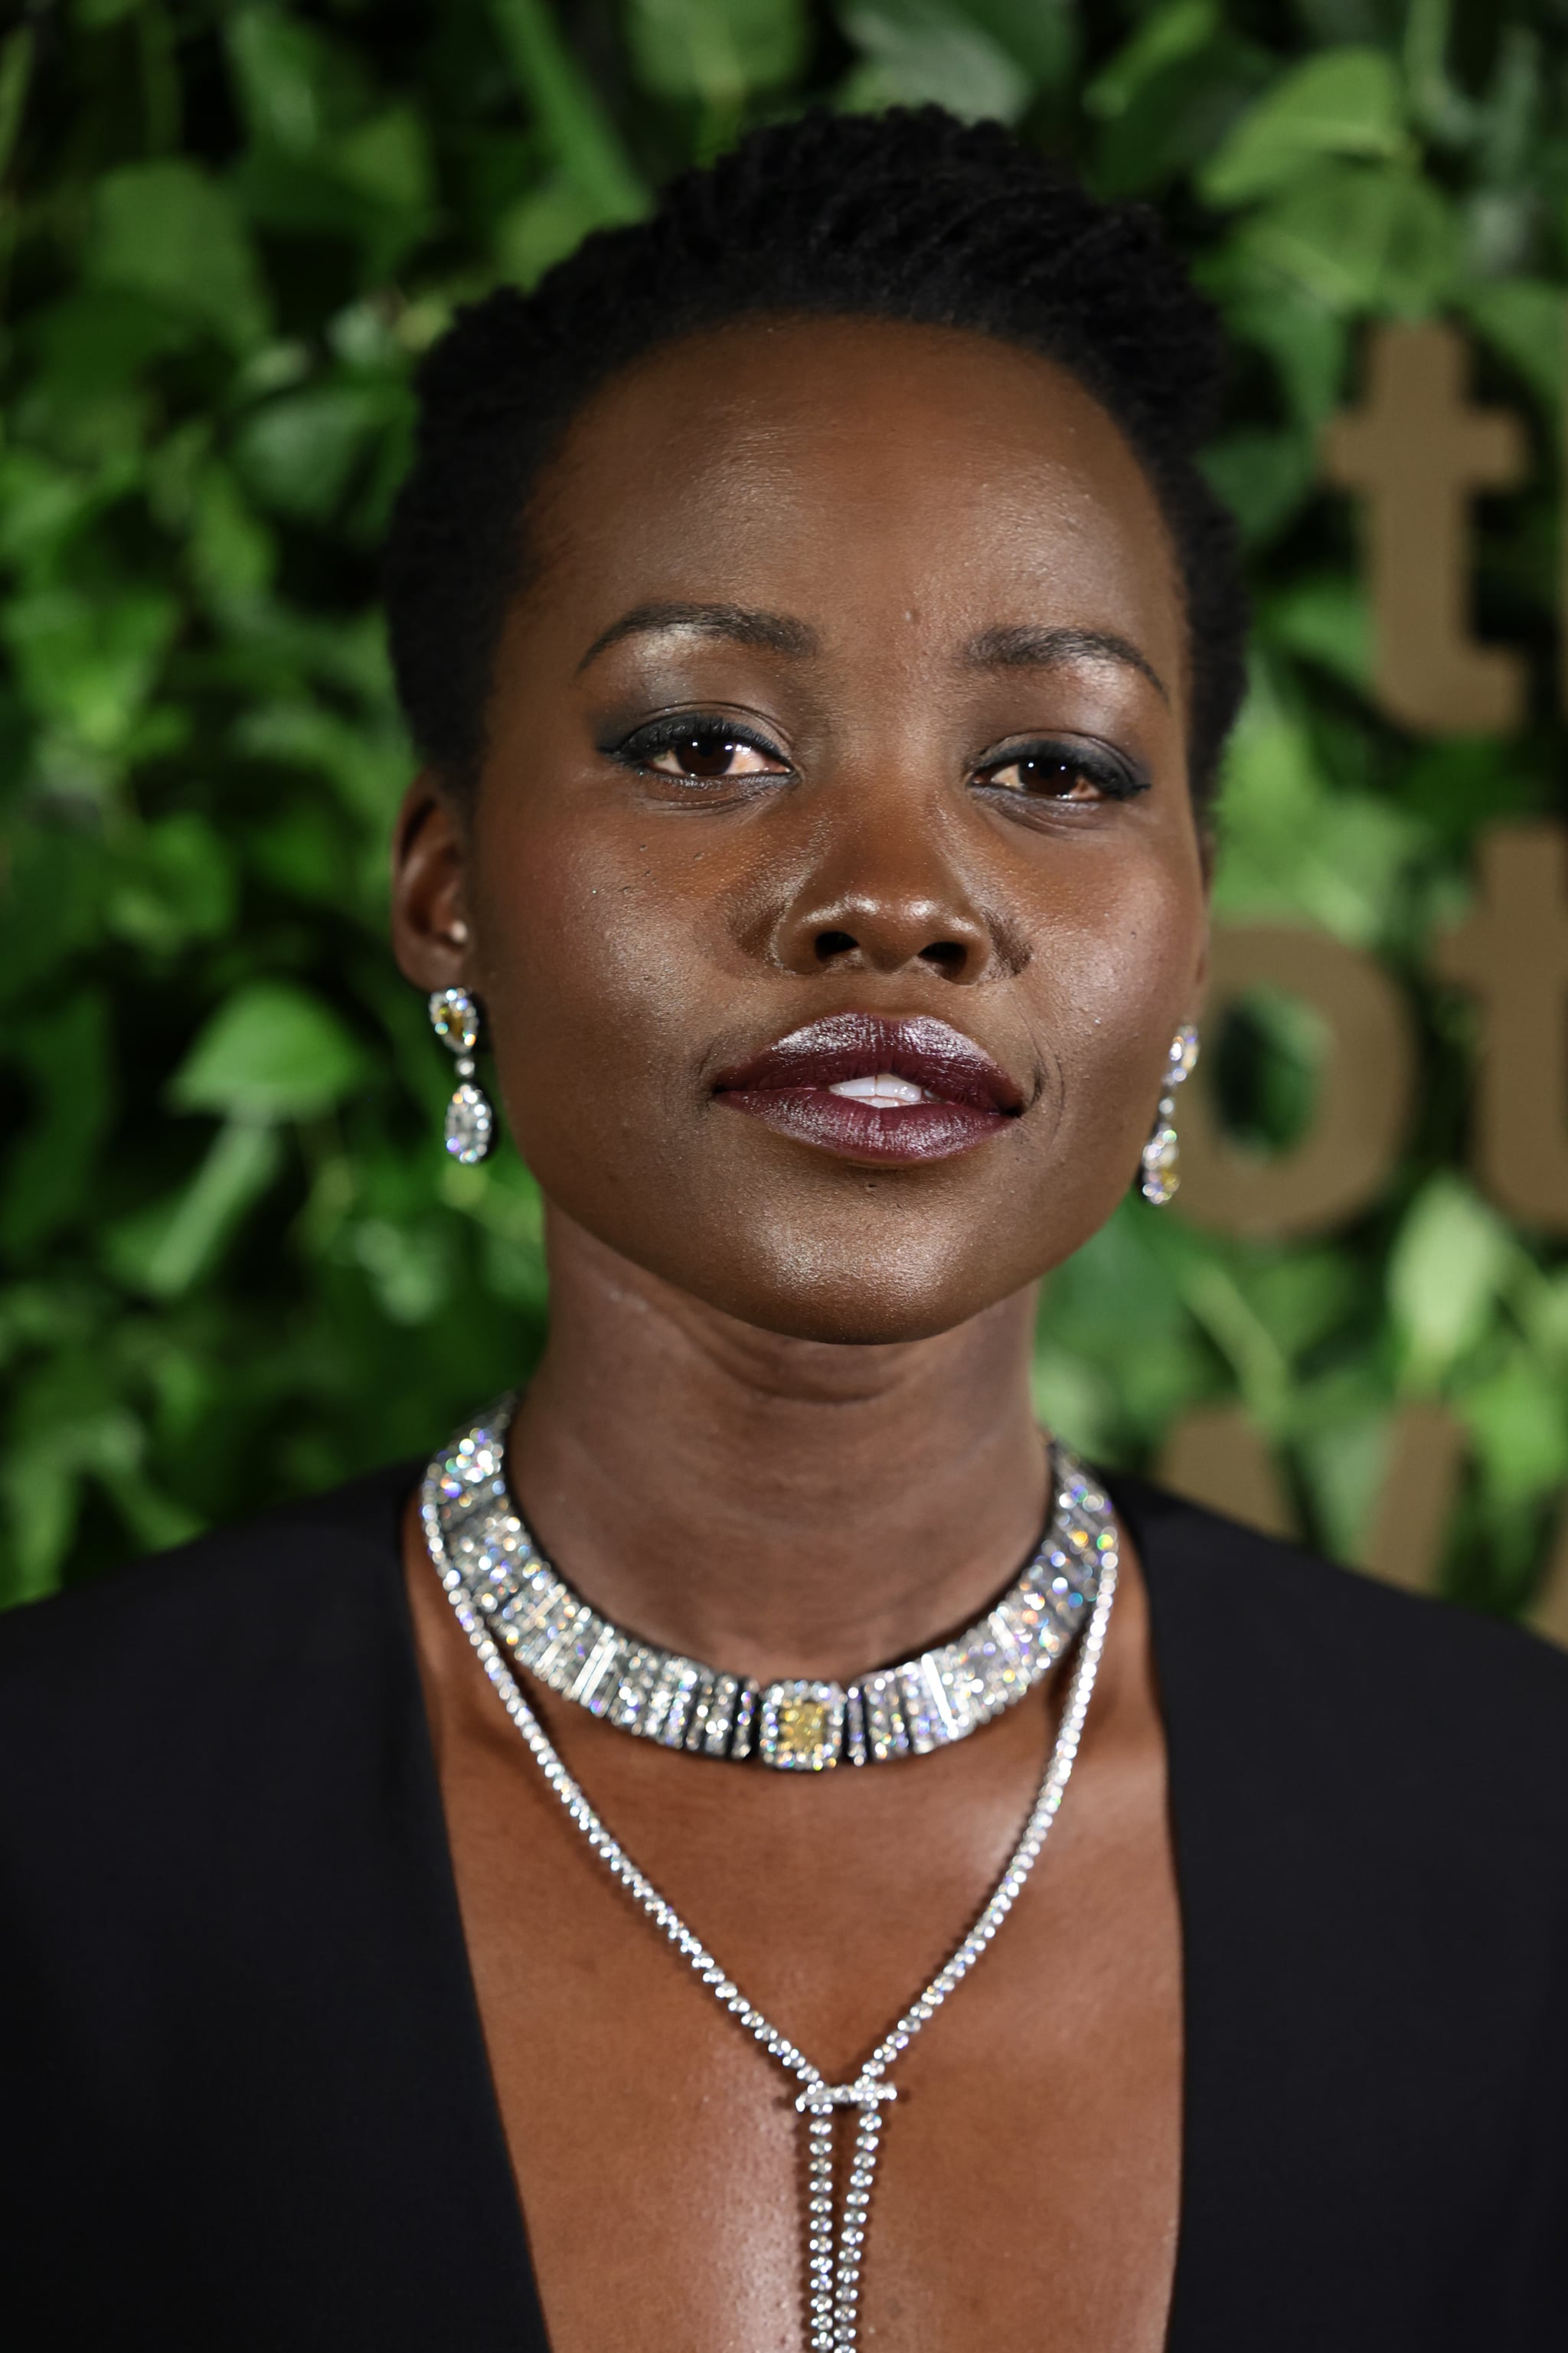 NEW YORK, NEW YORK - NOVEMBER 28: Lupita Nyong'o attends The 2022 Gotham Awards at Cipriani Wall Street on November 28, 2022 in New York City. (Photo by Dimitrios Kambouris/Getty Images for The Gotham Film & Media Institute)